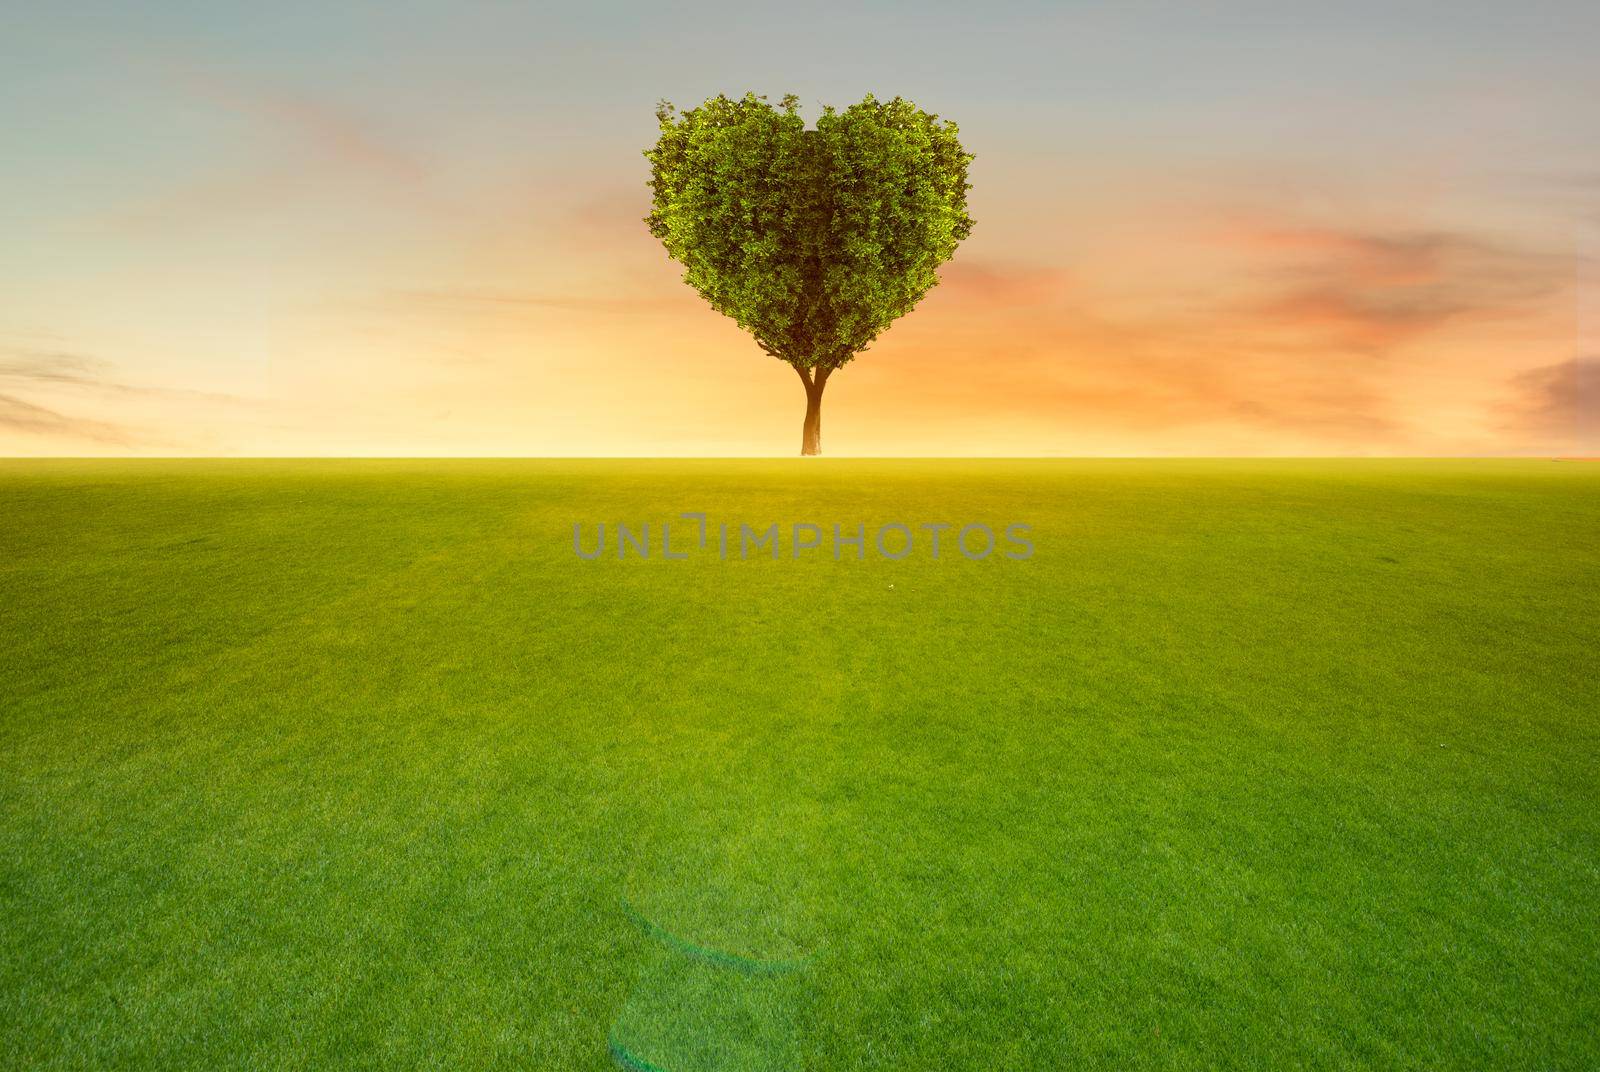 Green field with heart shape tree on sunset background. by thanumporn